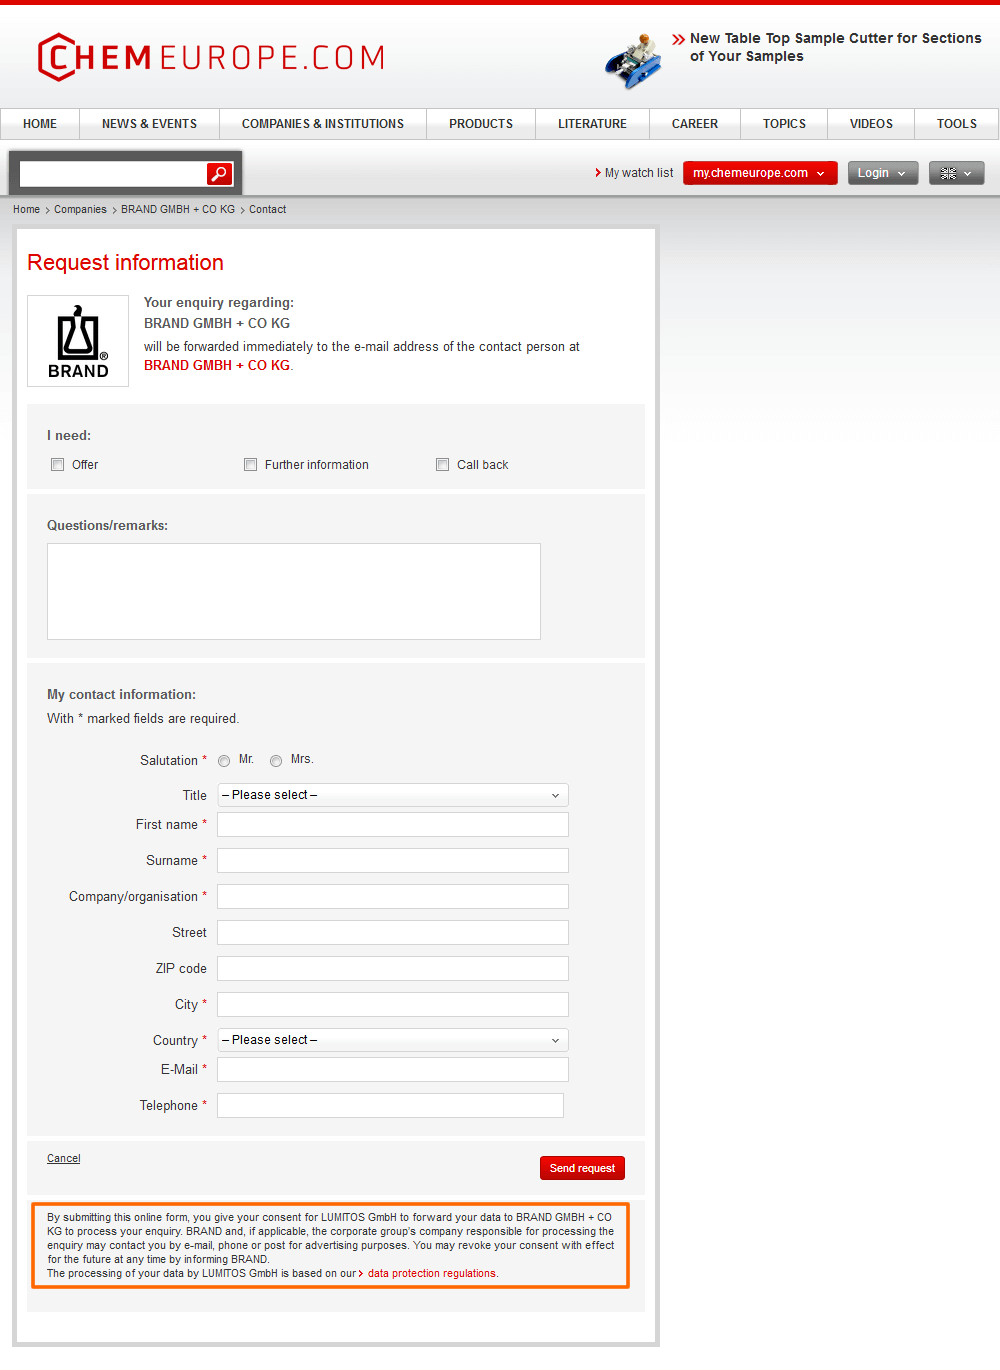 GDPR-compliant contact form 